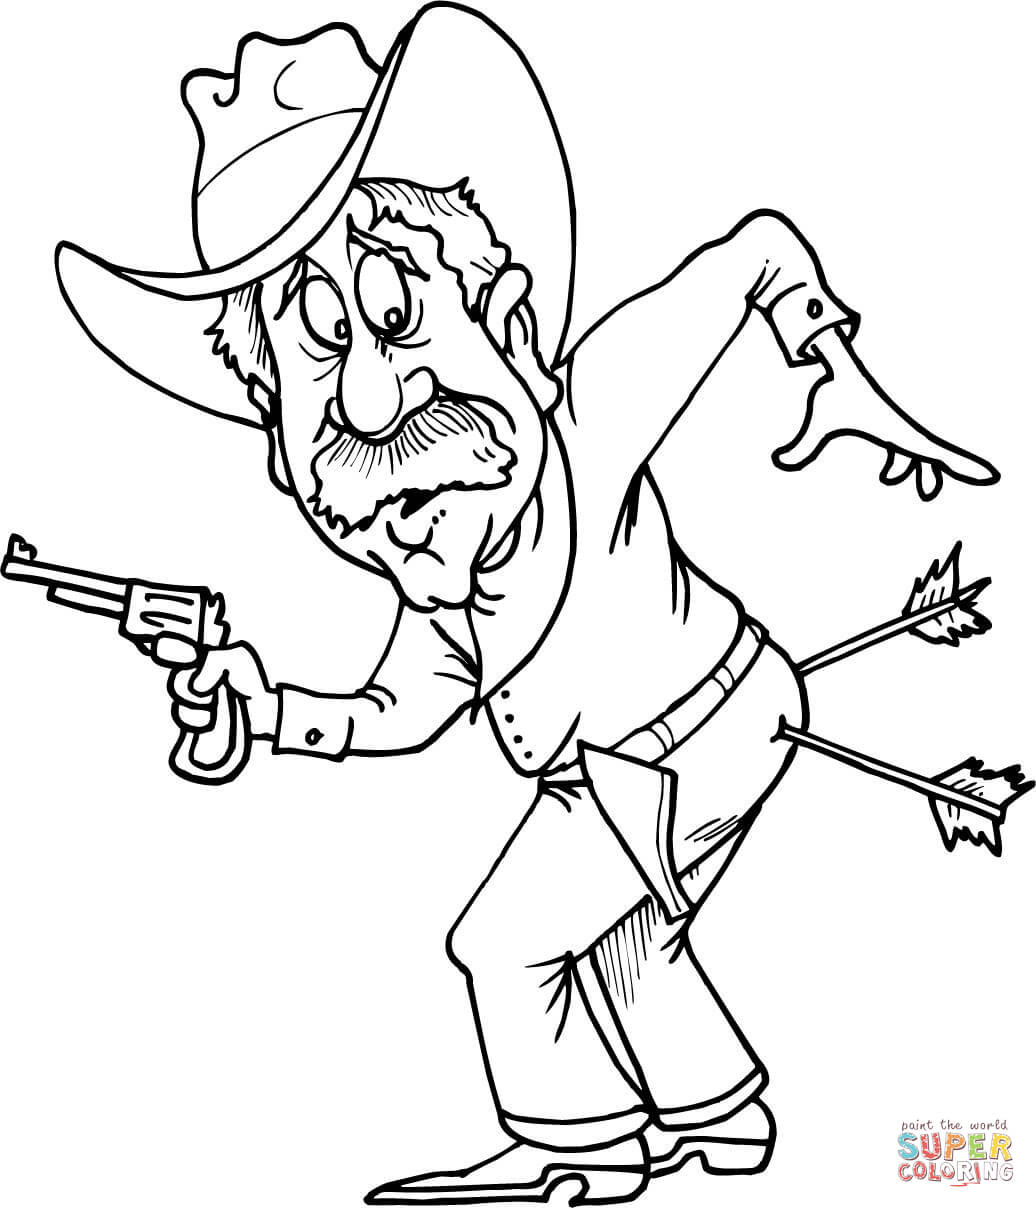 Western Cowboy Coloring Pages at GetColorings.com | Free printable